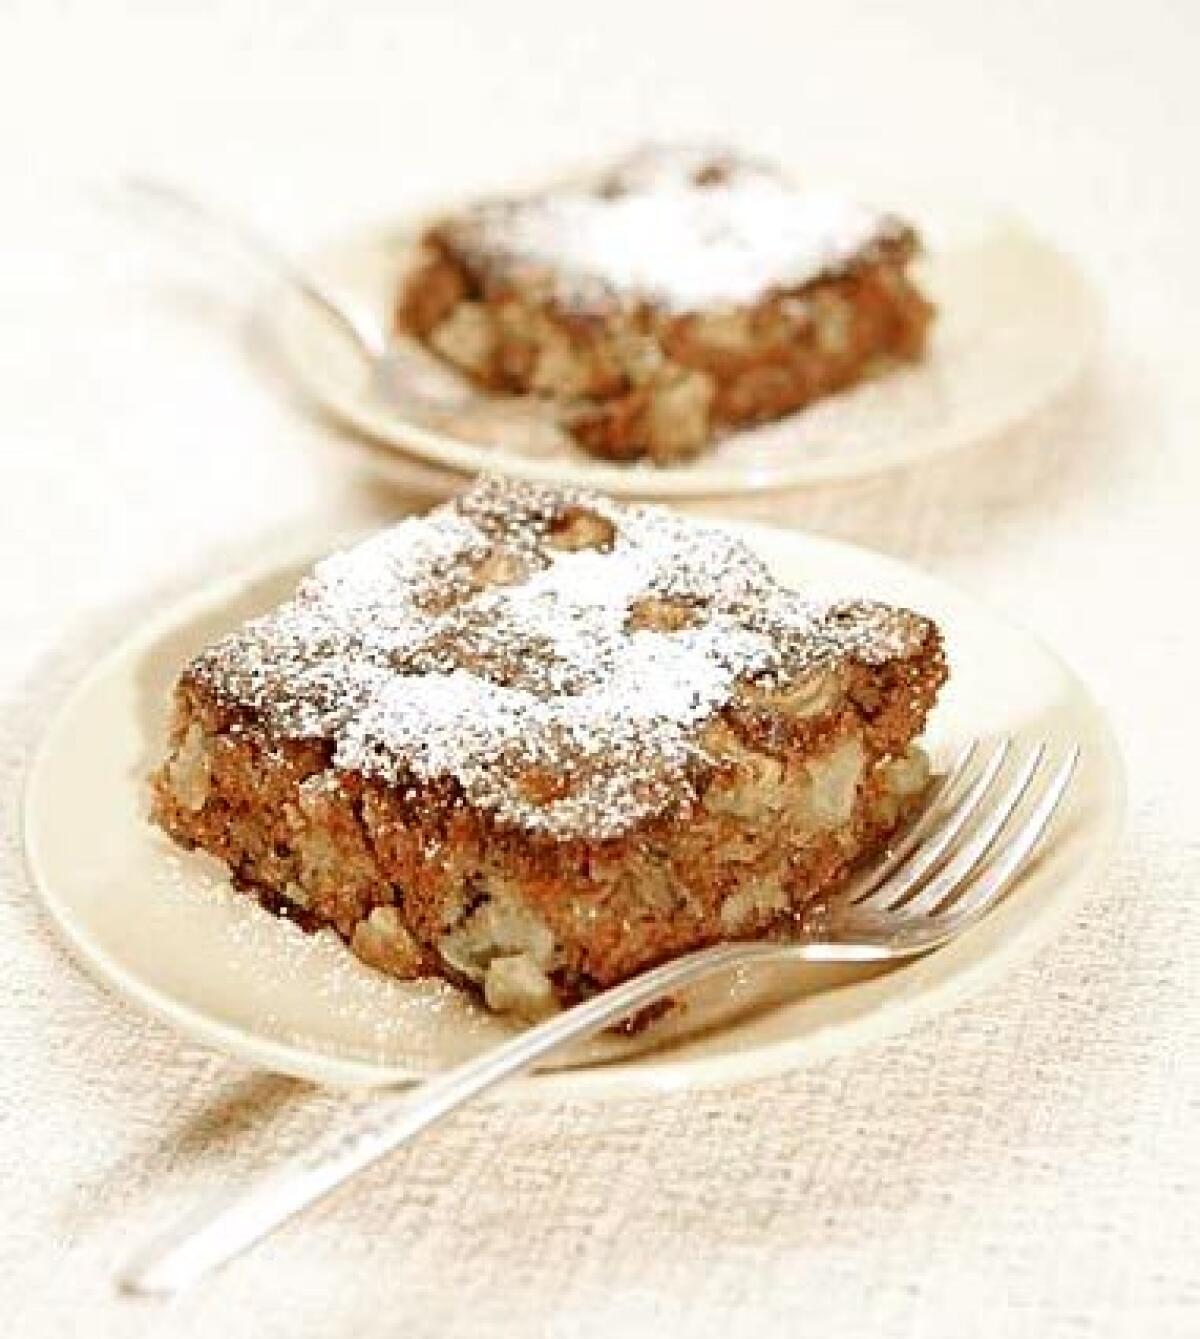 Despite its name, Boozie's apple cake is alcohol-free.